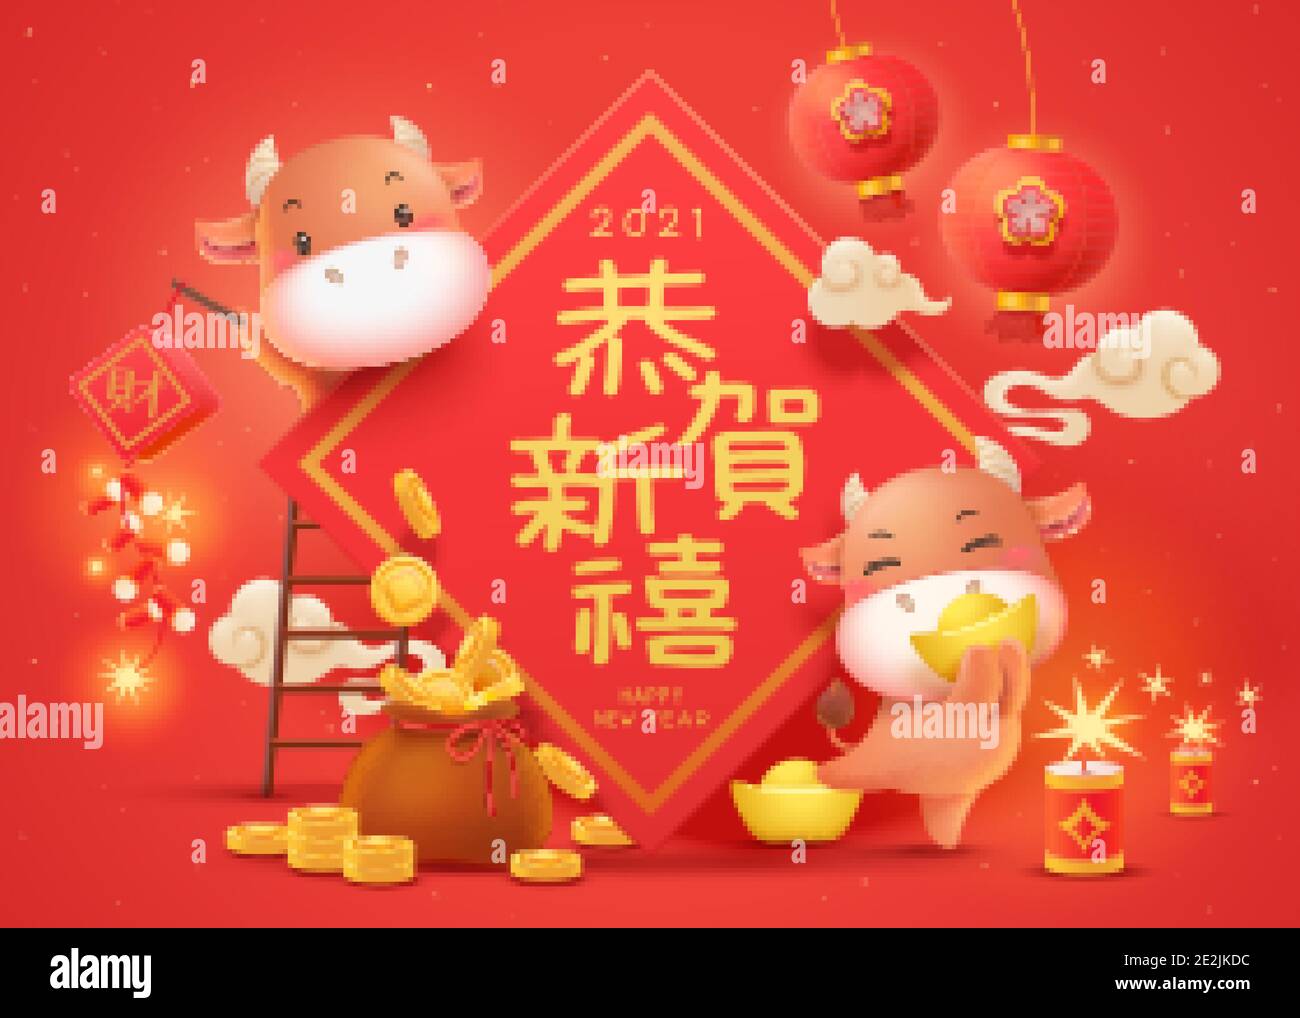 Cute cows holding gold ingot and firecrackers next to the giant doufang, Chinese translation: Best wishes for the year to come Stock Vector